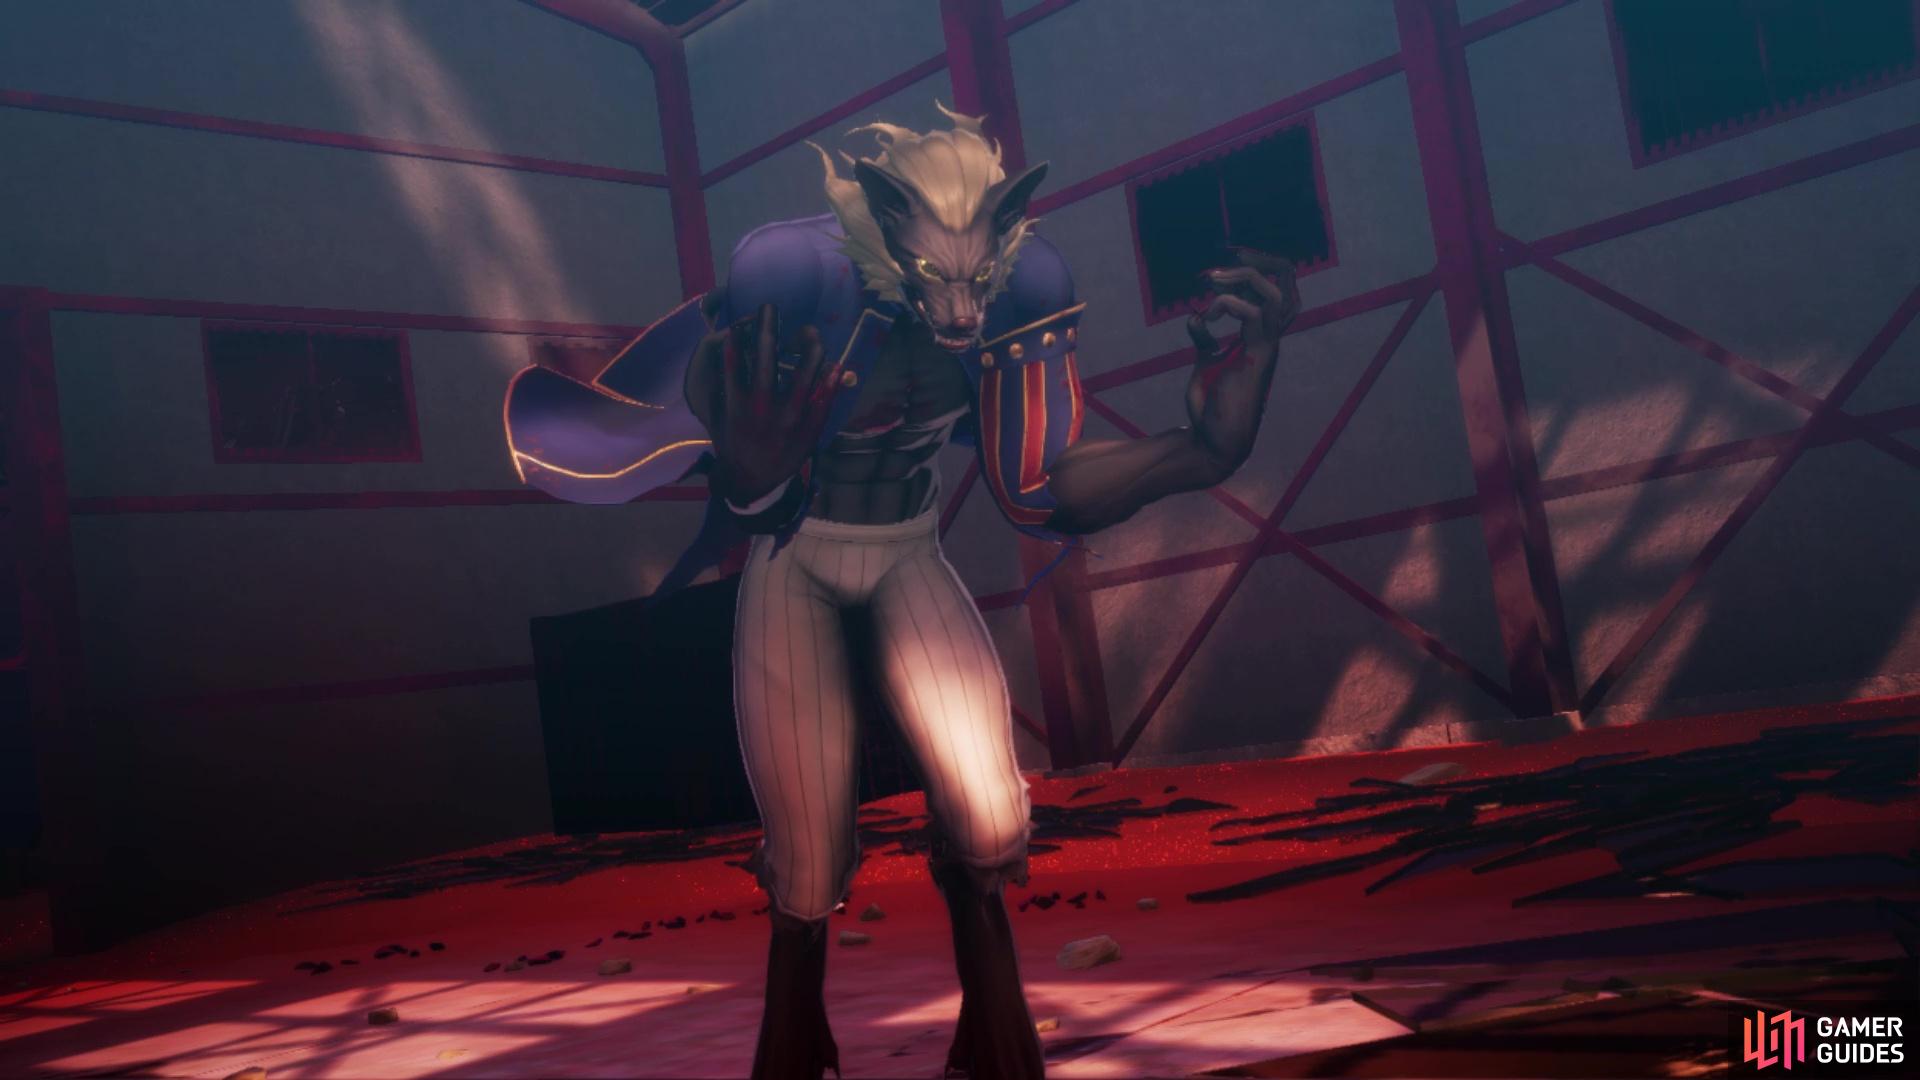 You’ll fight Loup-Garou at the Container Yard